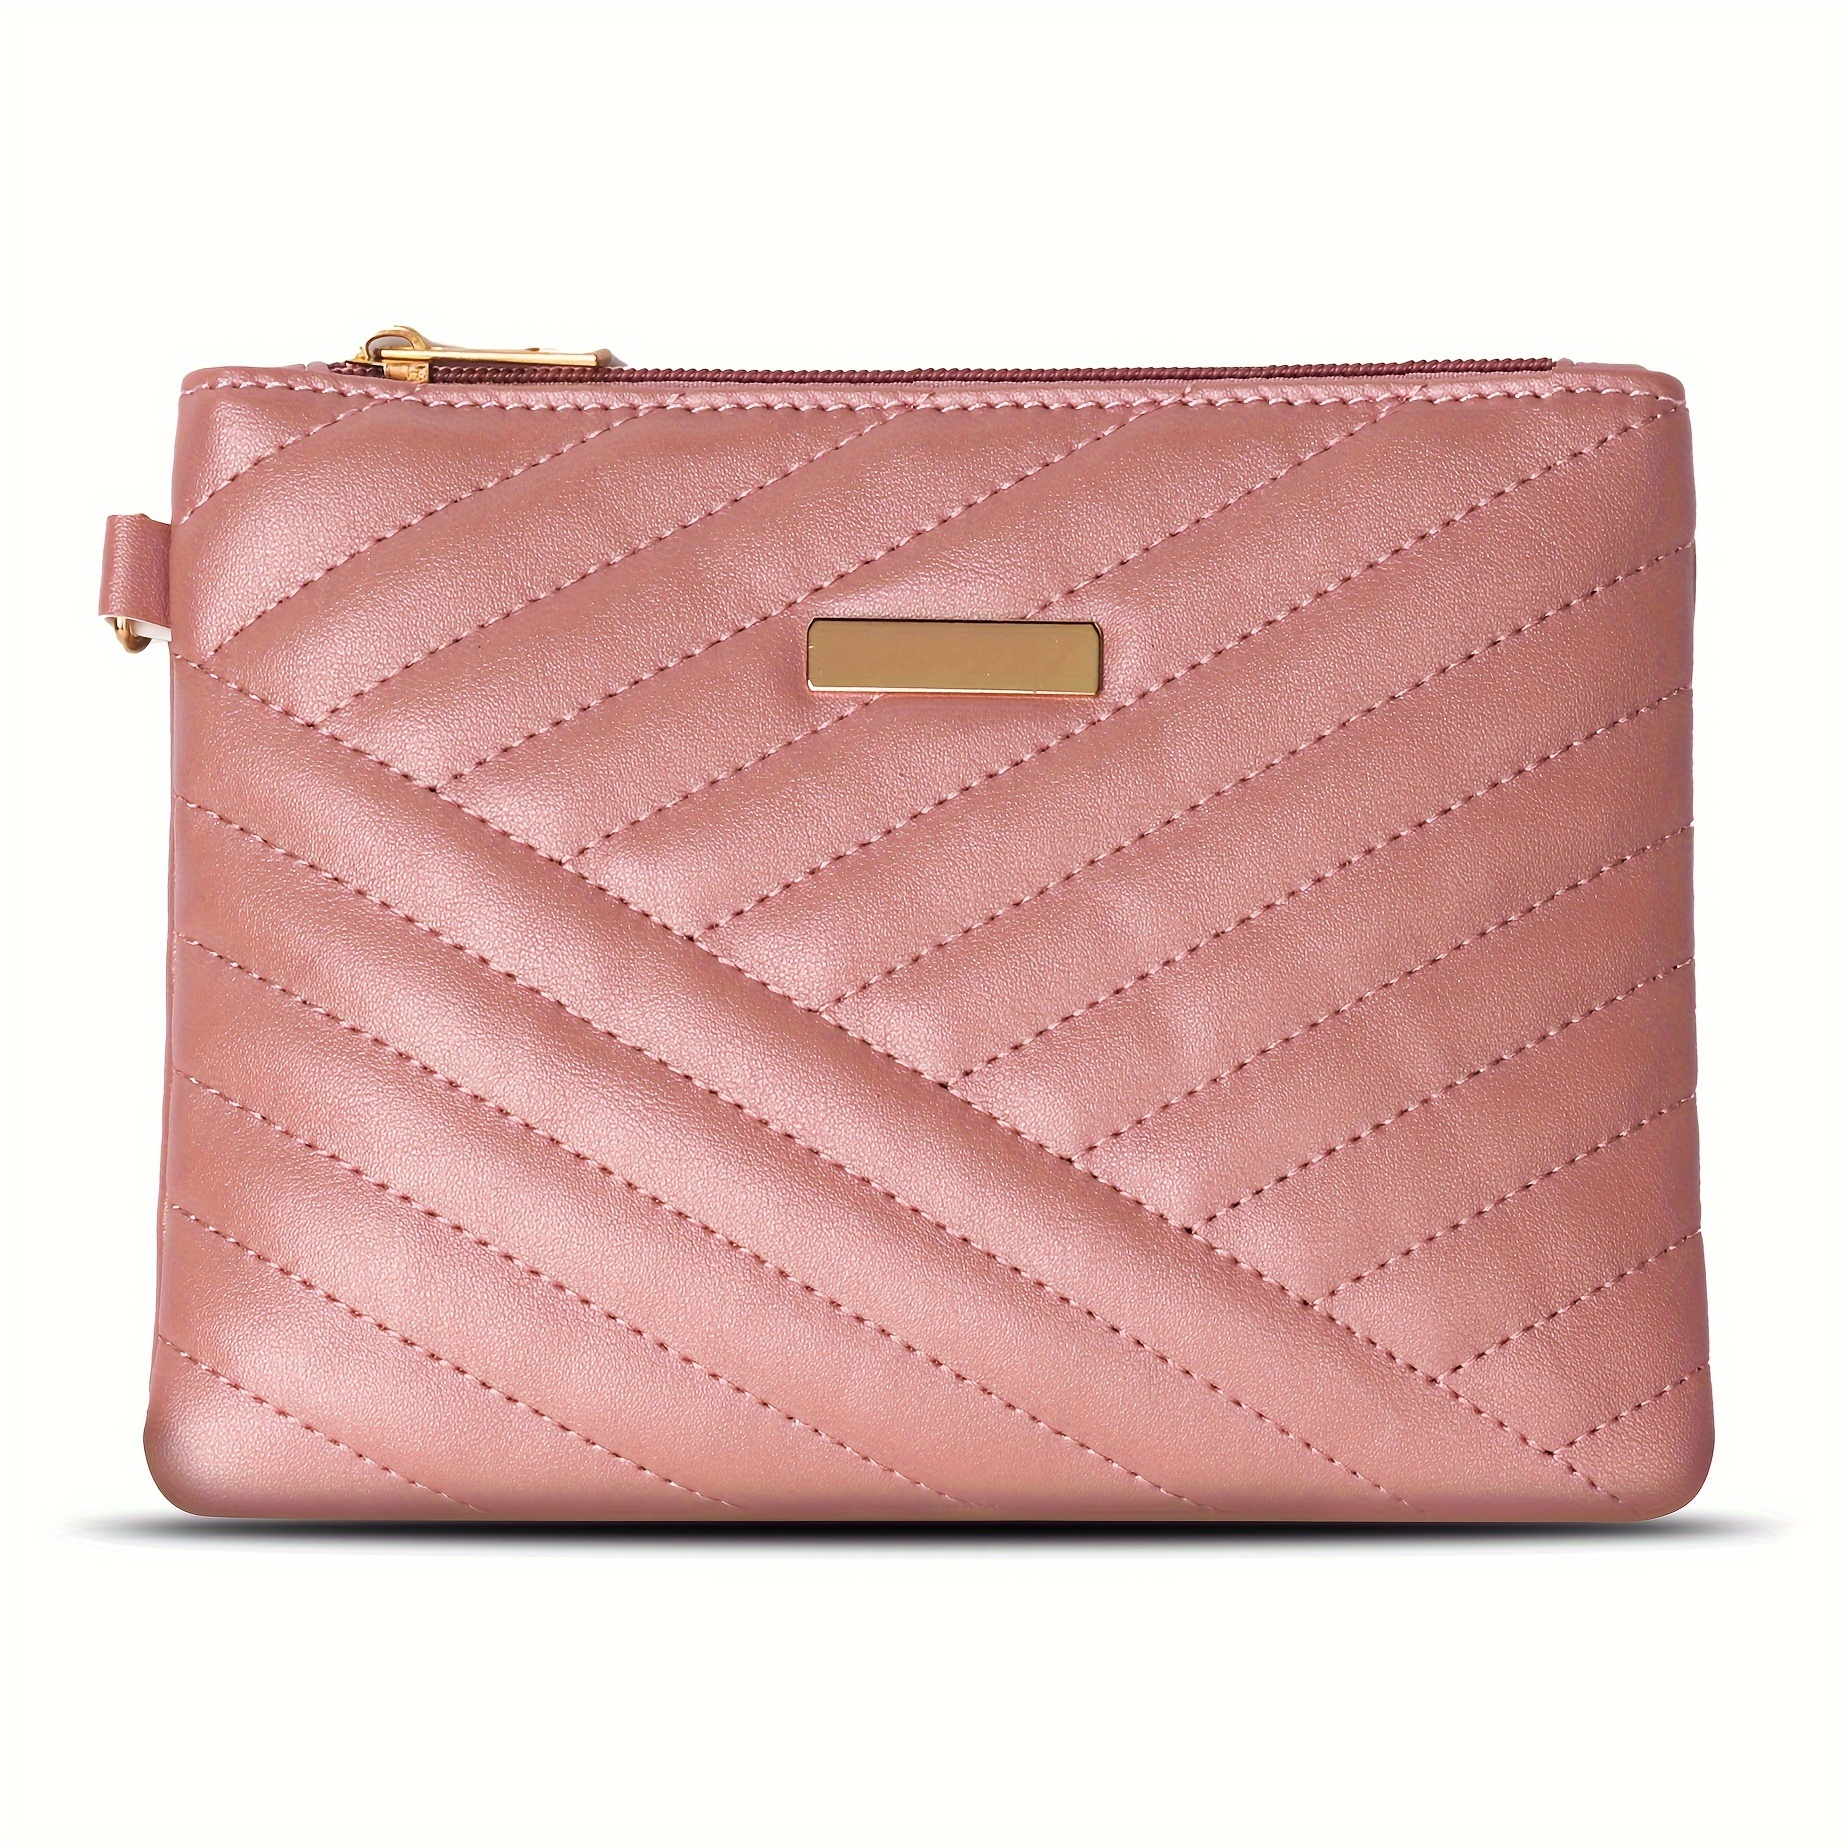 Strip Quilted Square Clutch Bag, Women's Pu Leather Coin Purse